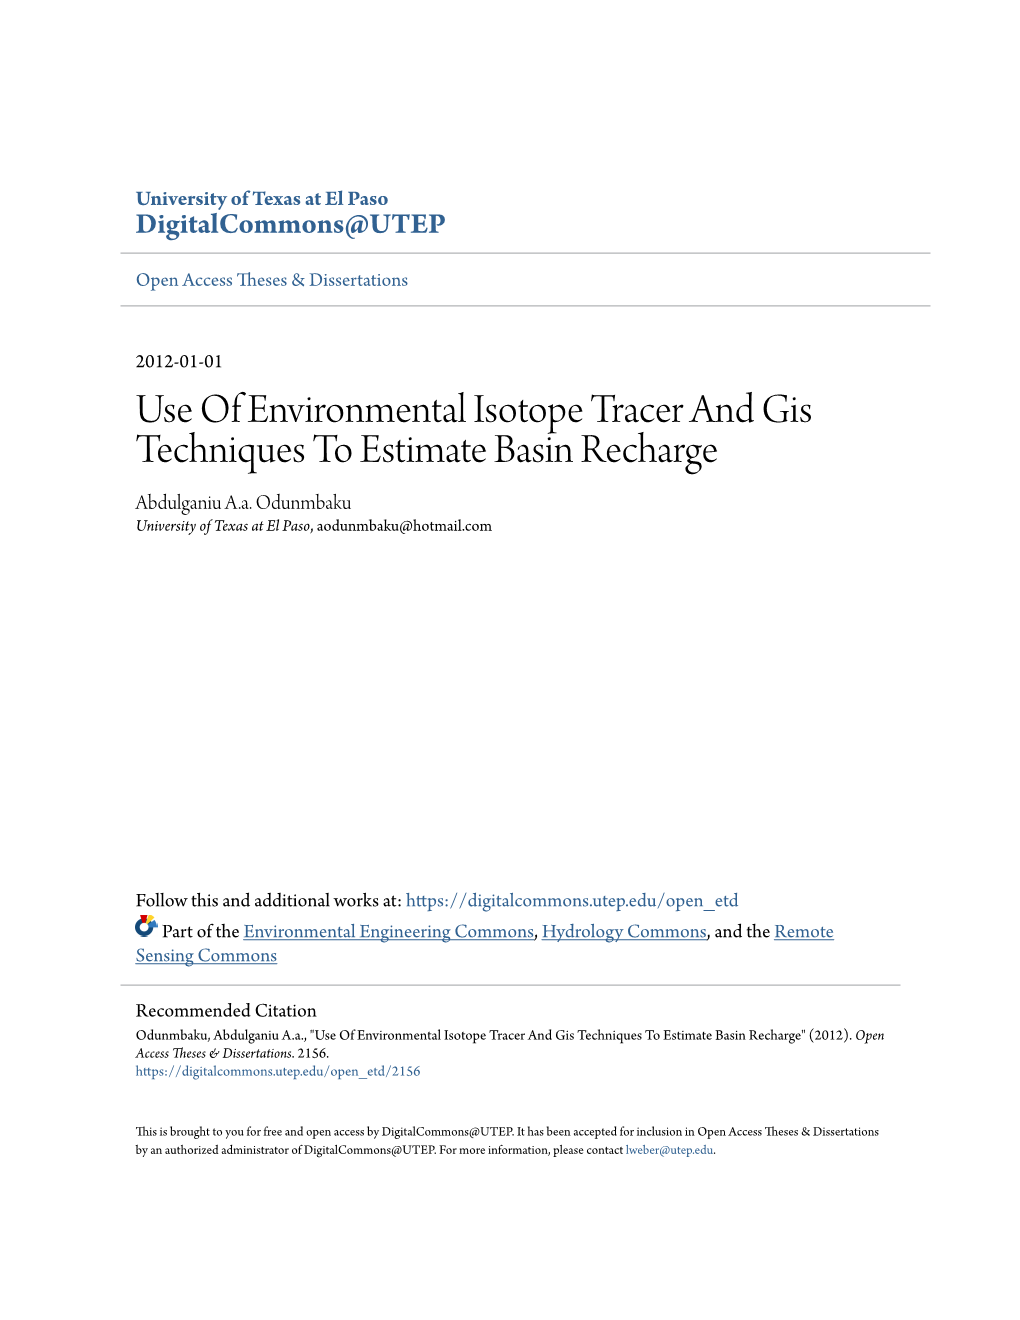 Use of Environmental Isotope Tracer and Gis Techniques to Estimate Basin Recharge Abdulganiu A.A